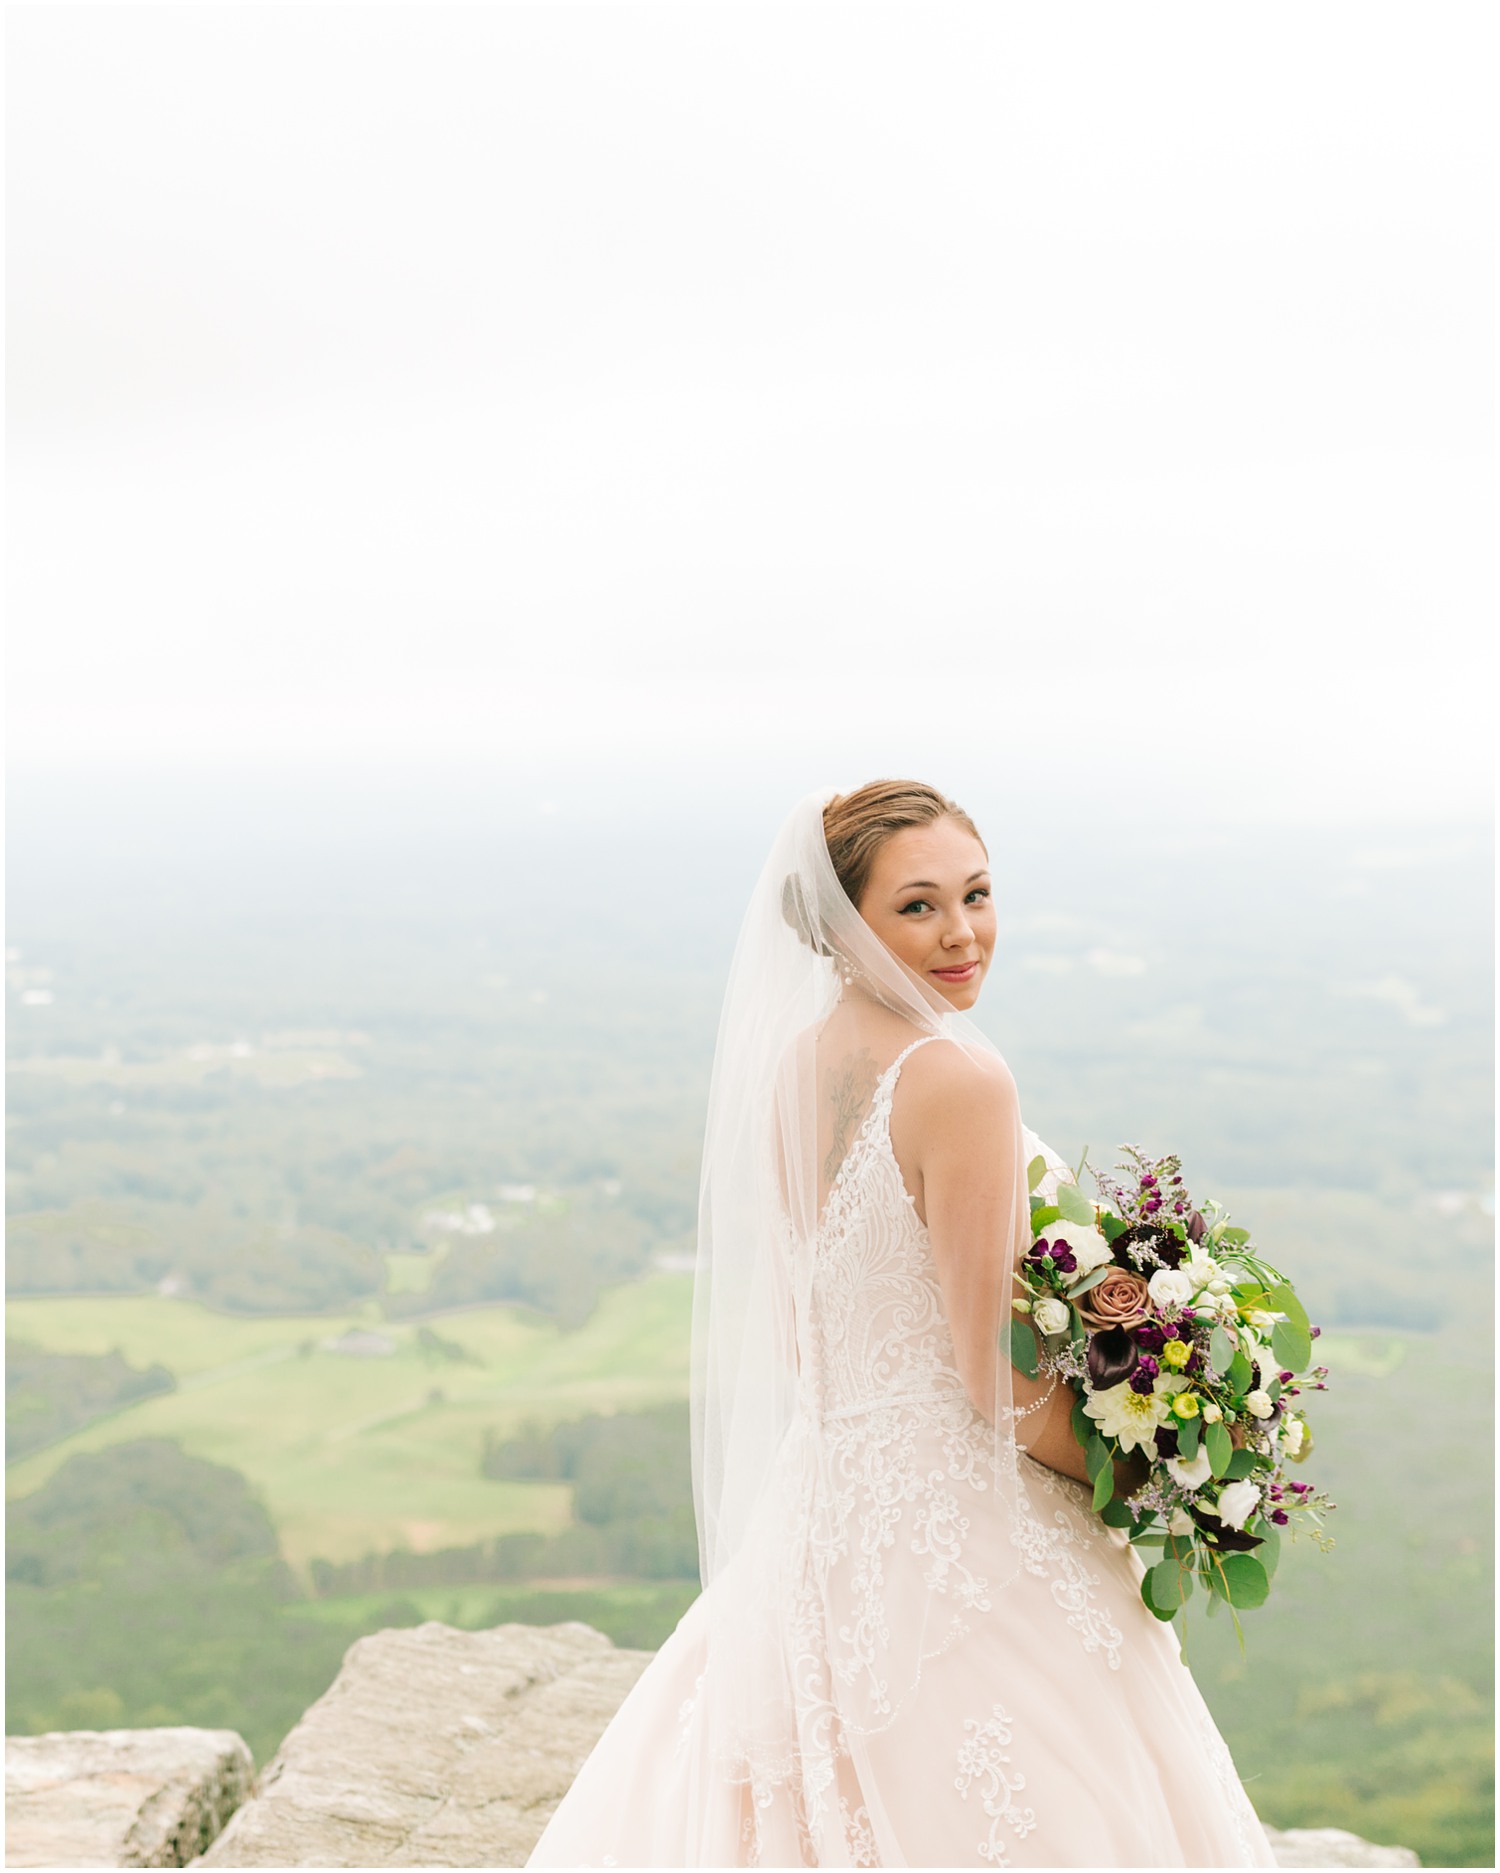 classic bridal photos with veil over bride's shoulders